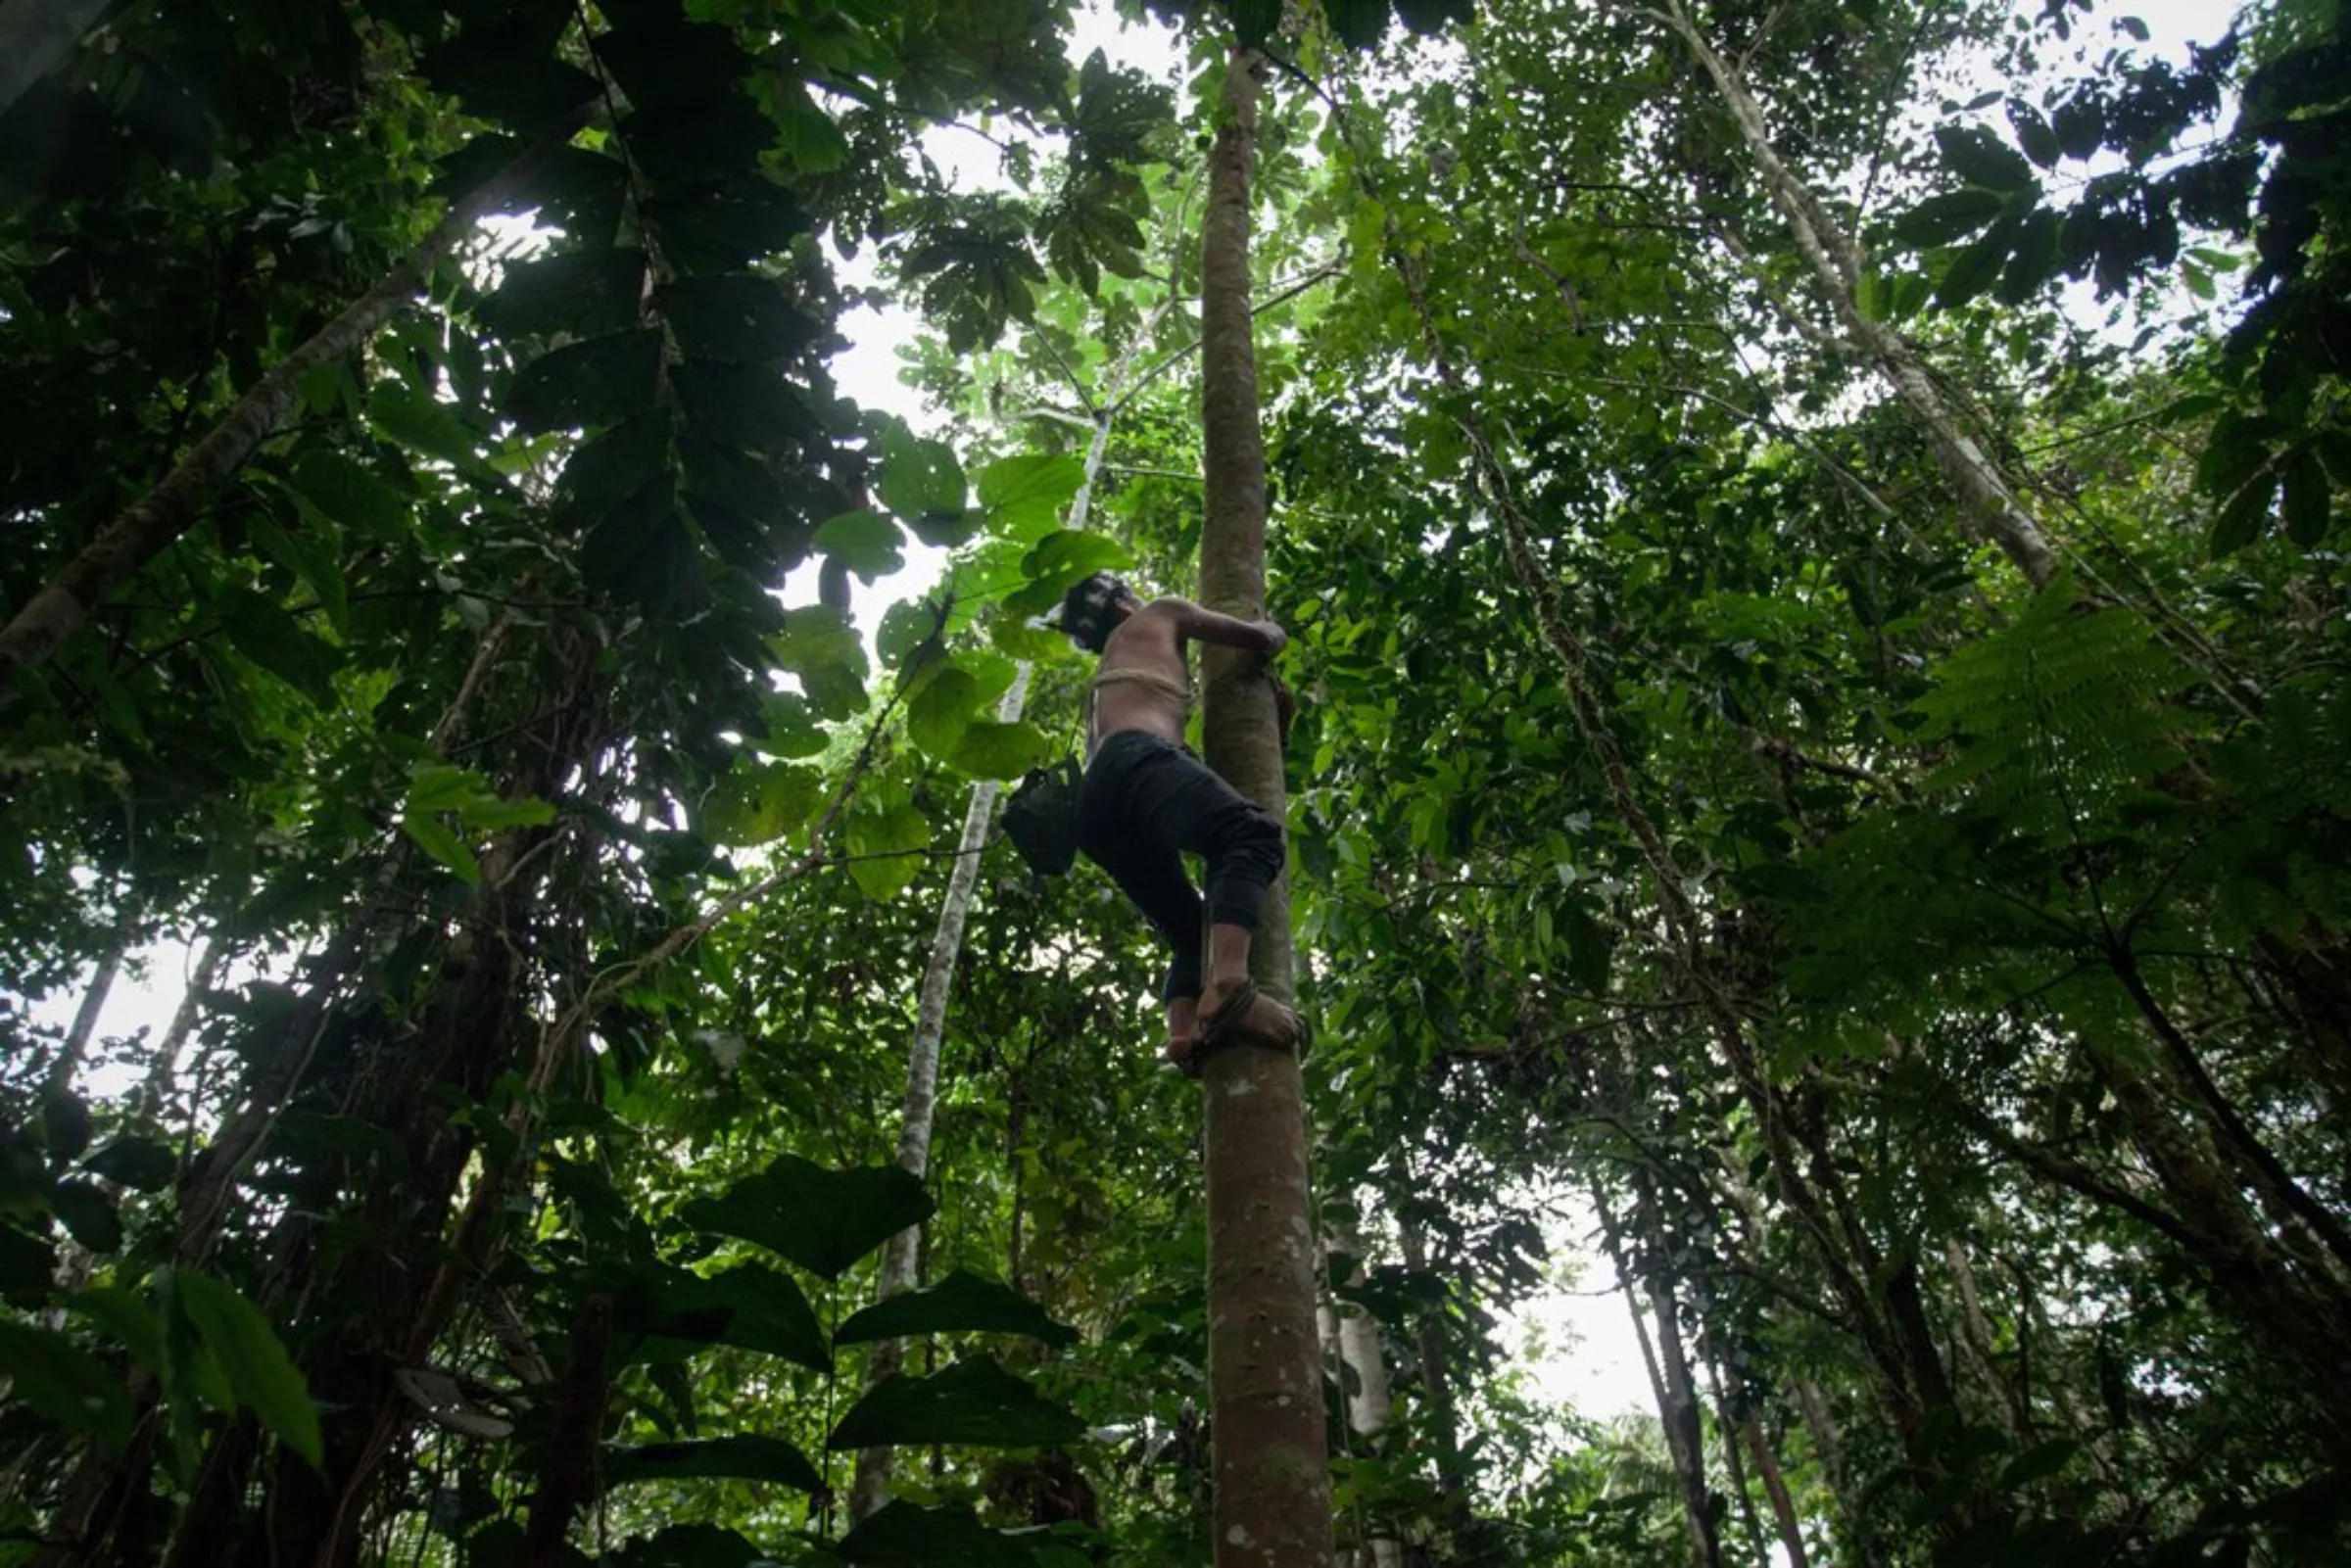 Bird hunter Carlos Enqueri, from the Waorani of Pastaza indigenous group, climbs a tree in the Amazon rainforest in the province of Pastaza, Ecuador, on April 25, 2022